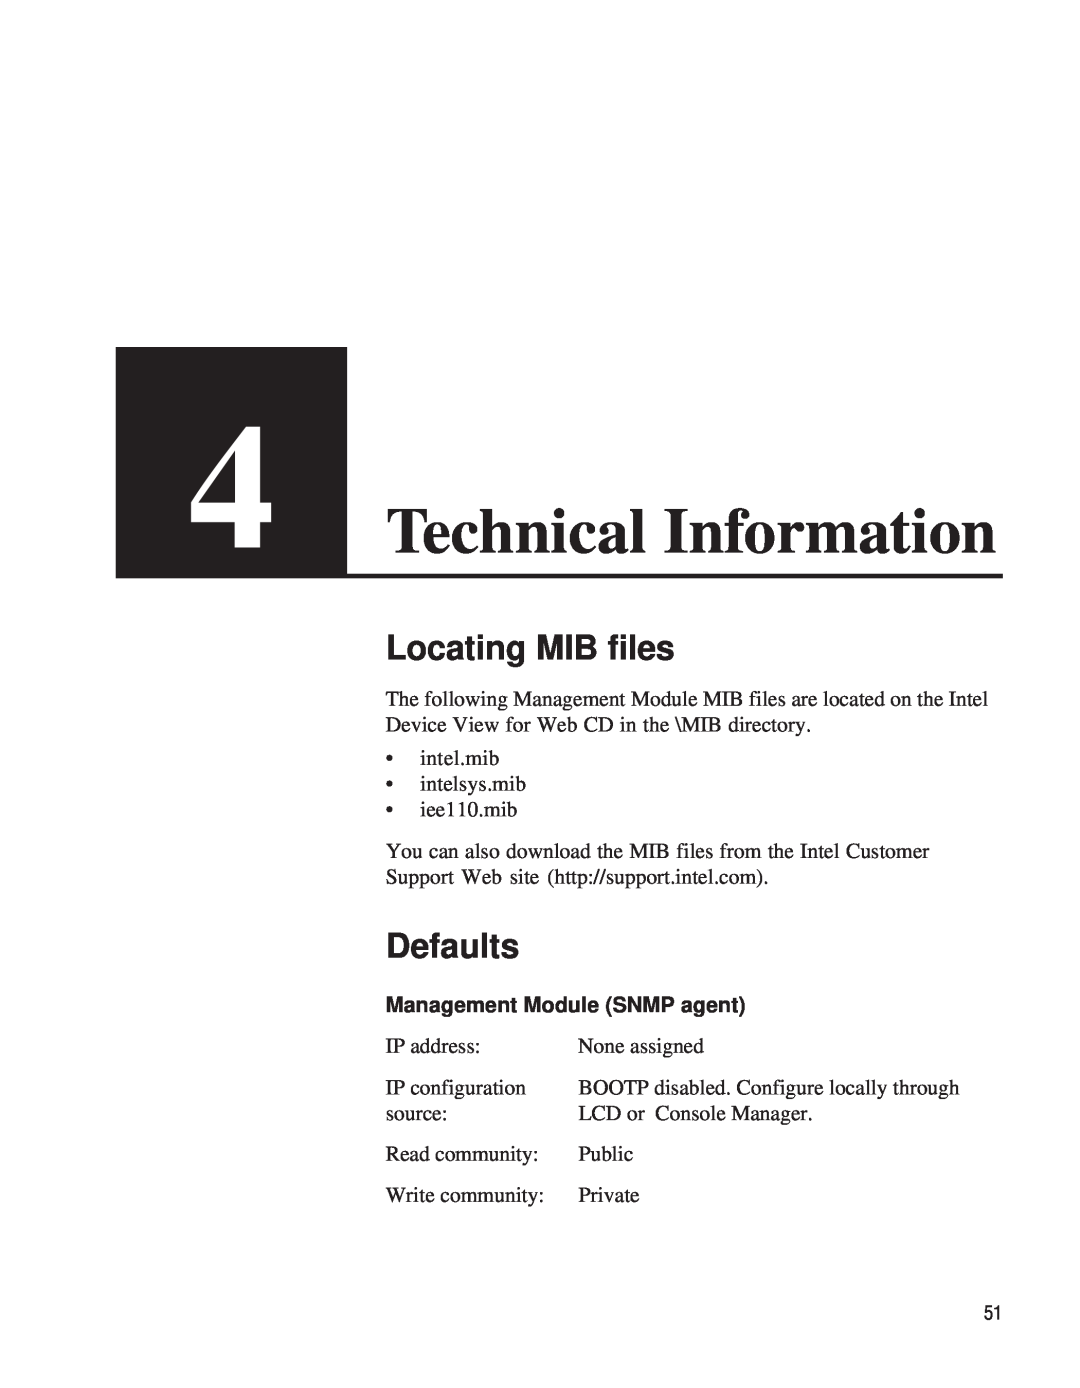 Intel EE110MM manual Technical Information, Locating MIB files, Defaults 